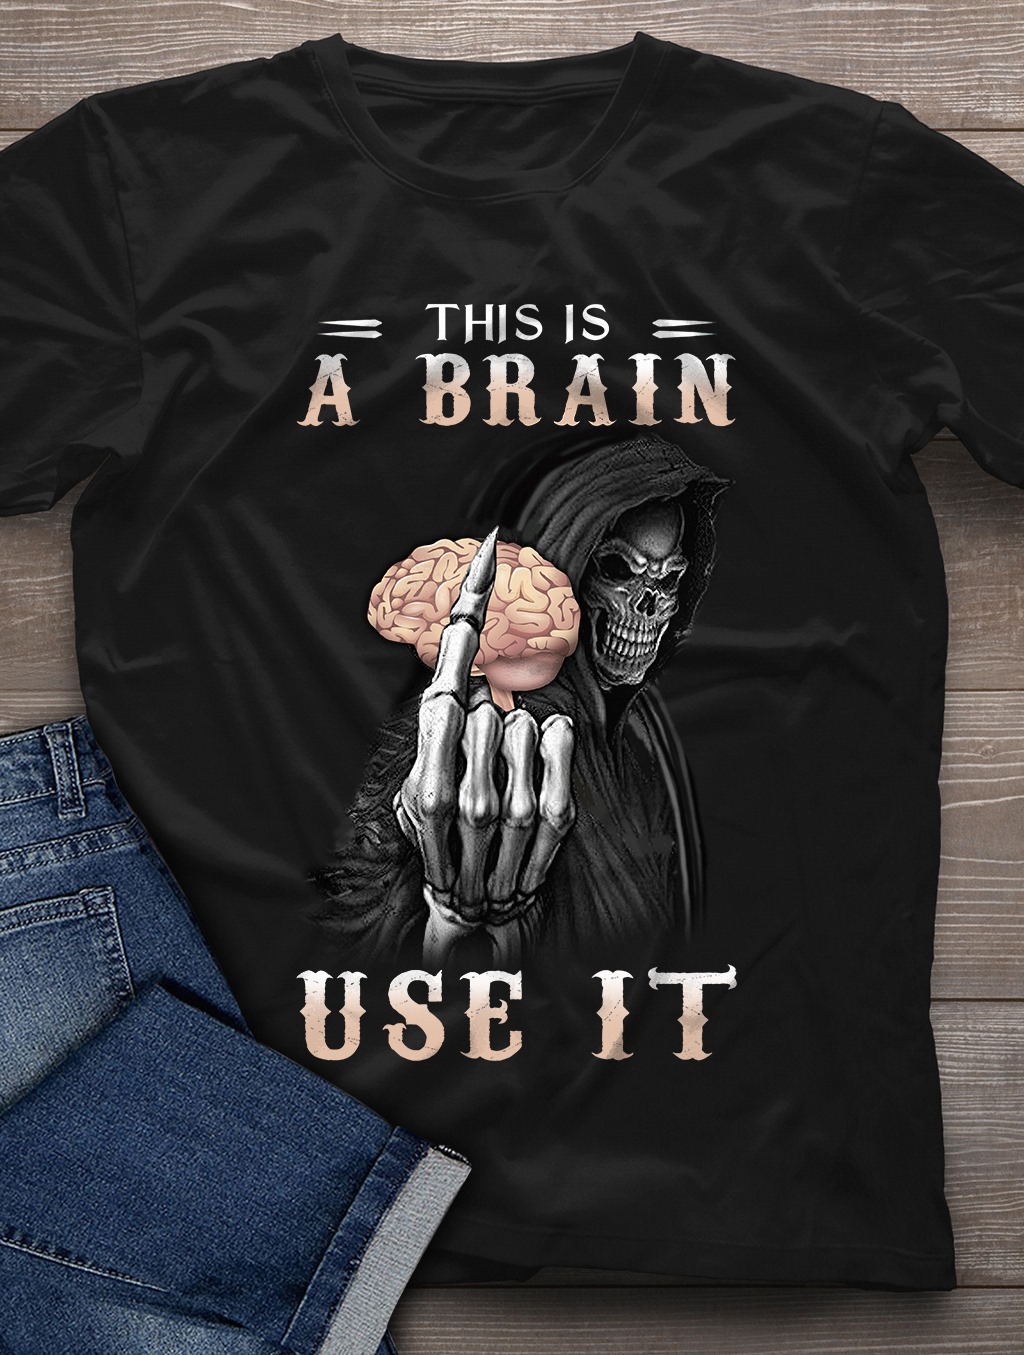 This is a brain use it - Evil with brain